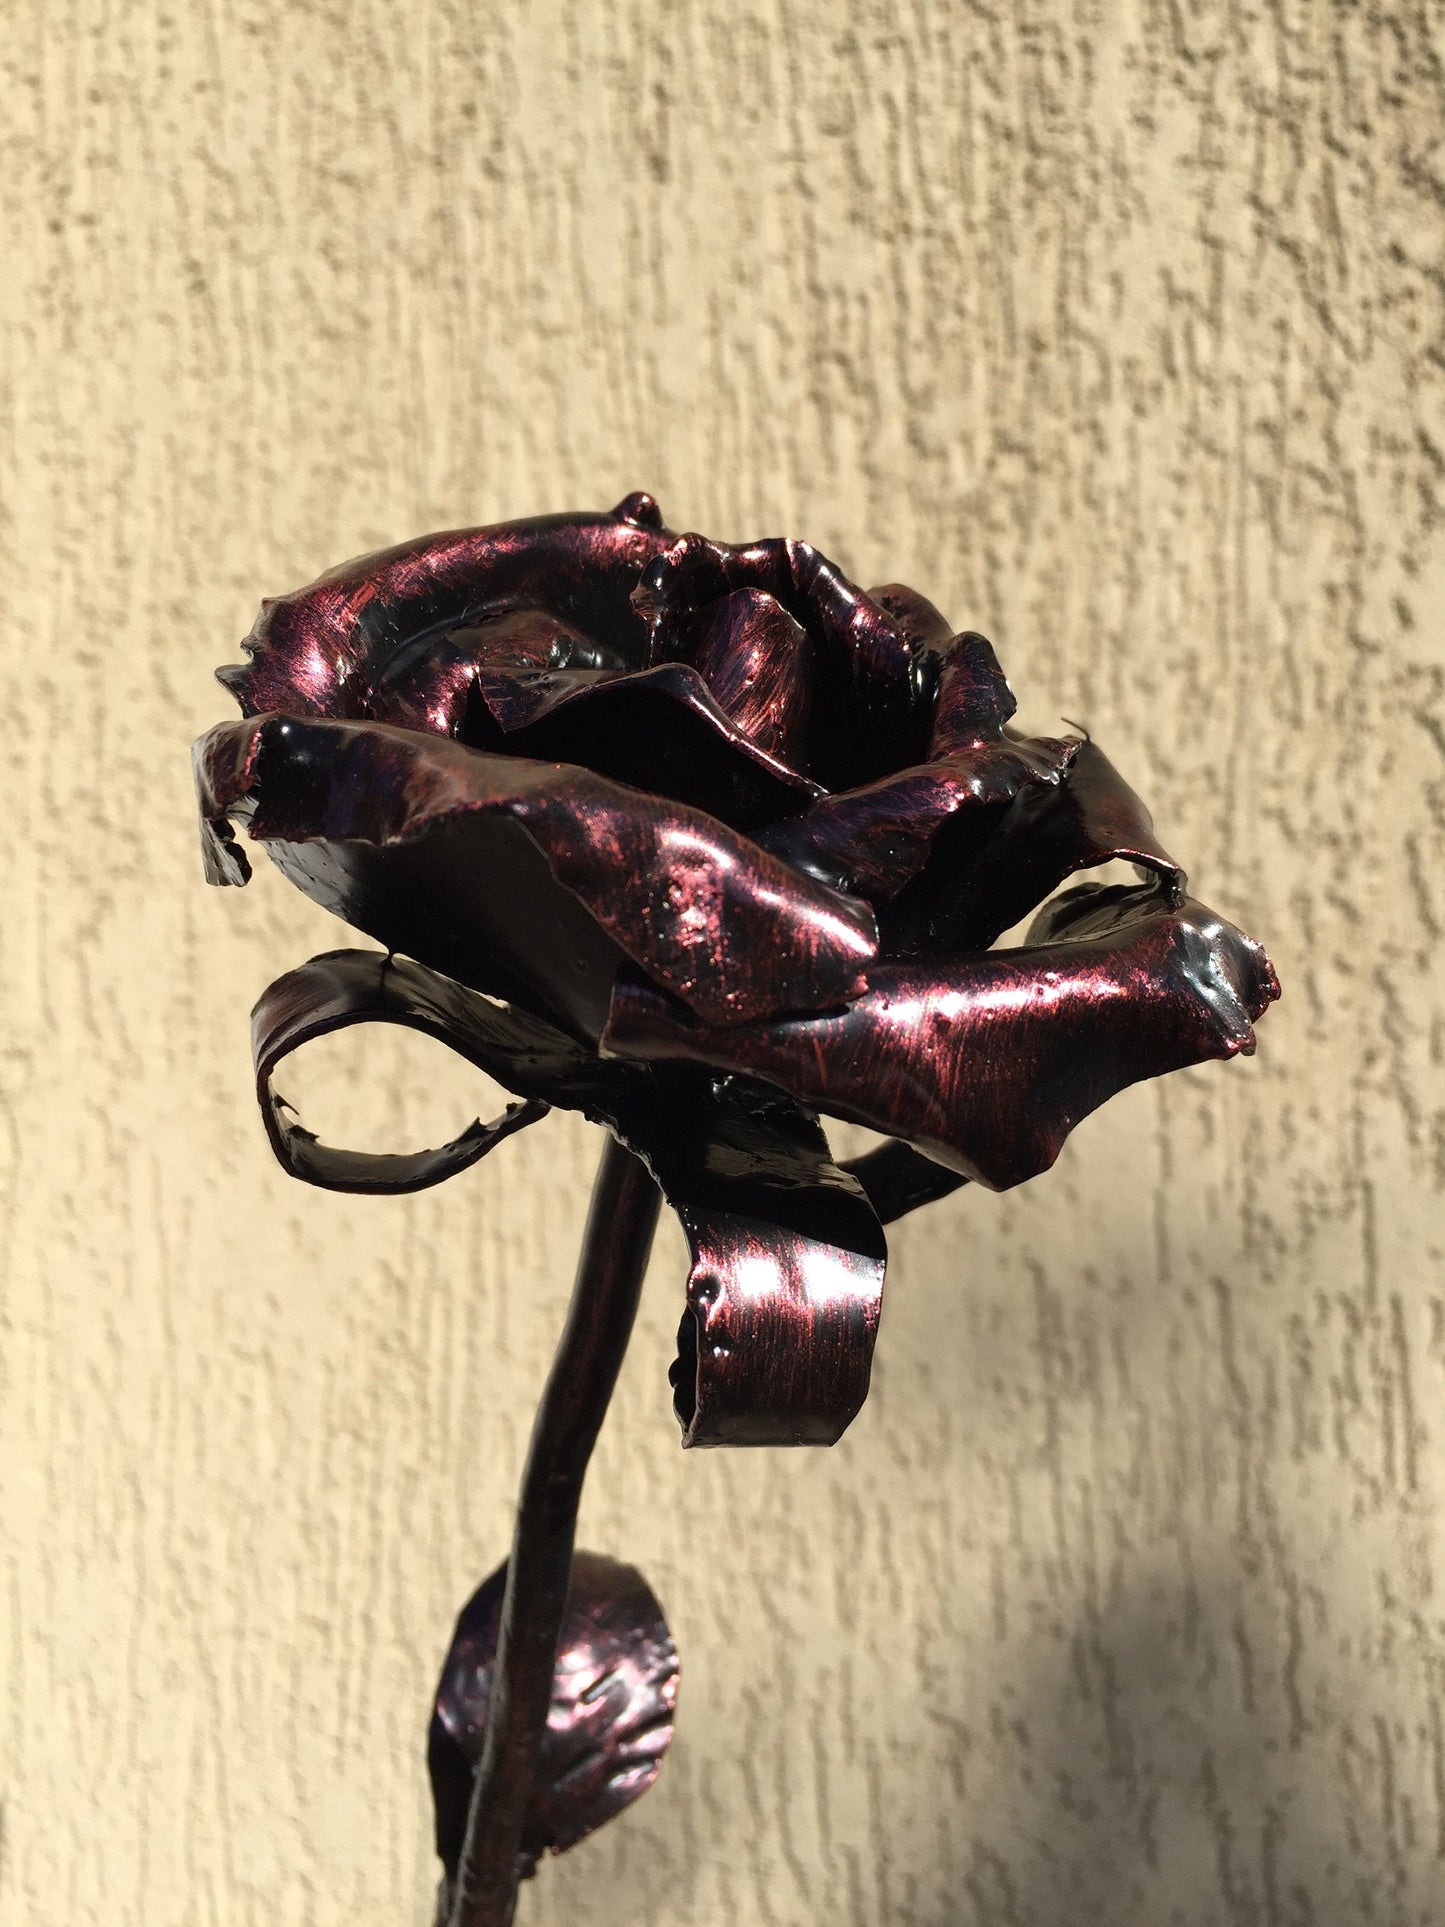 Metal rose, ruby rose, ruby wedding, anniversary gift for parents, 40 Year Anniversary, 40th year of marriage, 40 Year wedding, 40th wedding